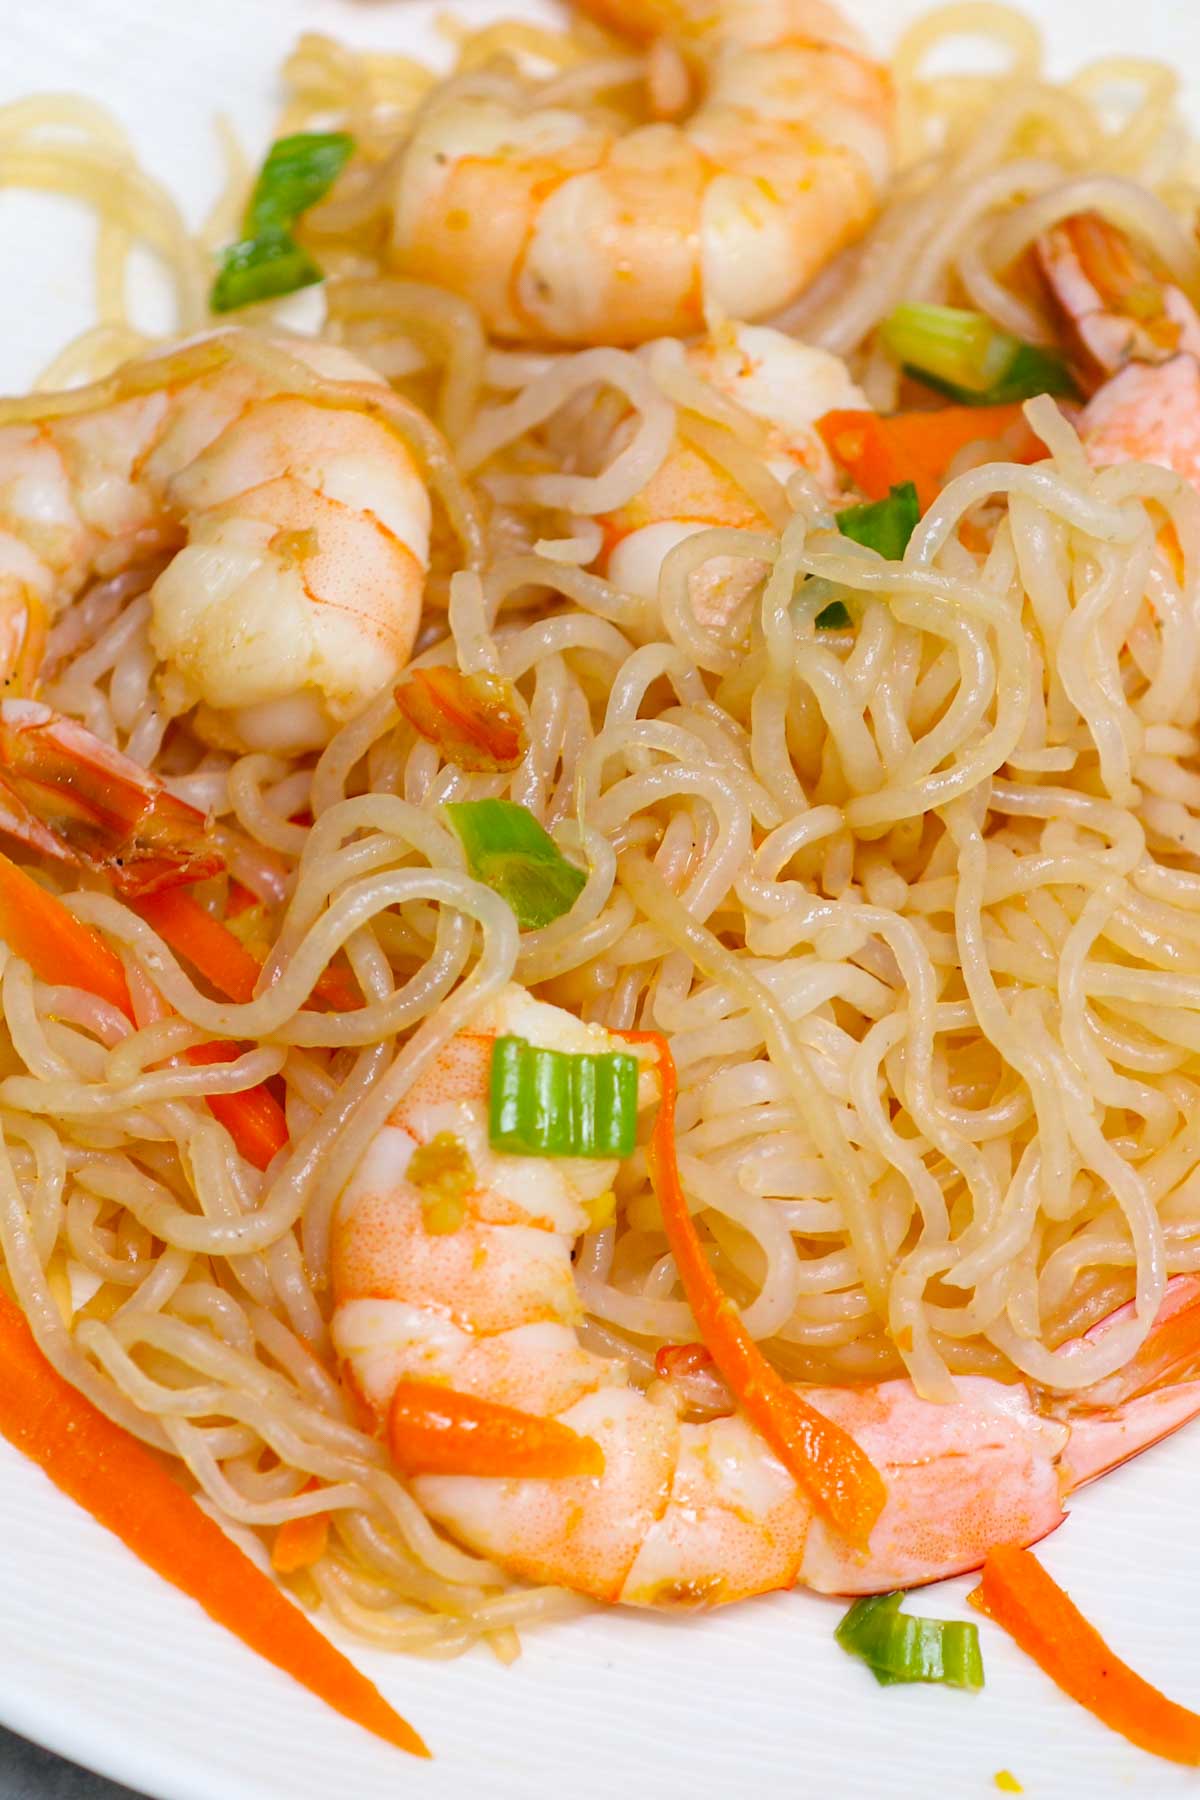 Have you had Miracle Noodles yet? Also called shirataki noodles, they’re a plant-based, grain-free pasta and rice alternative you’ve got to try! If you want all of the flavors with fewer calories and carbs, you’re going to love all these easy miracle noodle recipes. Whether you’re keto, paleo, vegan, or gluten-free, you can enjoy this product guilt-free.